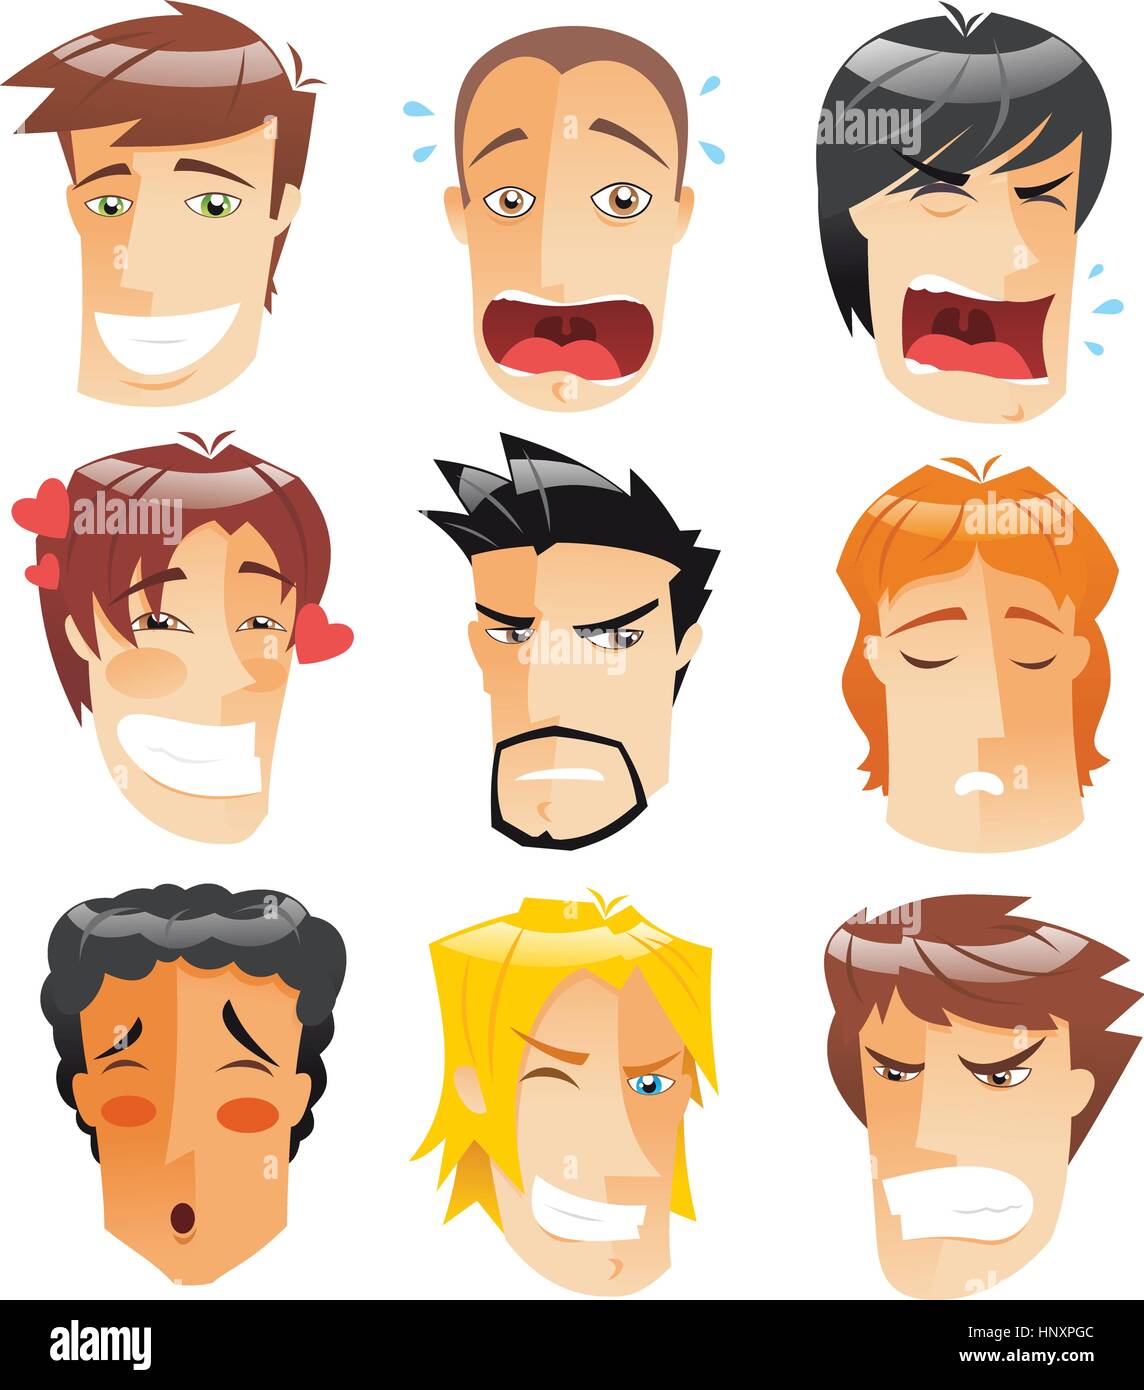 Human Head People Front View Avatar Profile Men faces set collection, vector illustration cartoon. Stock Vector